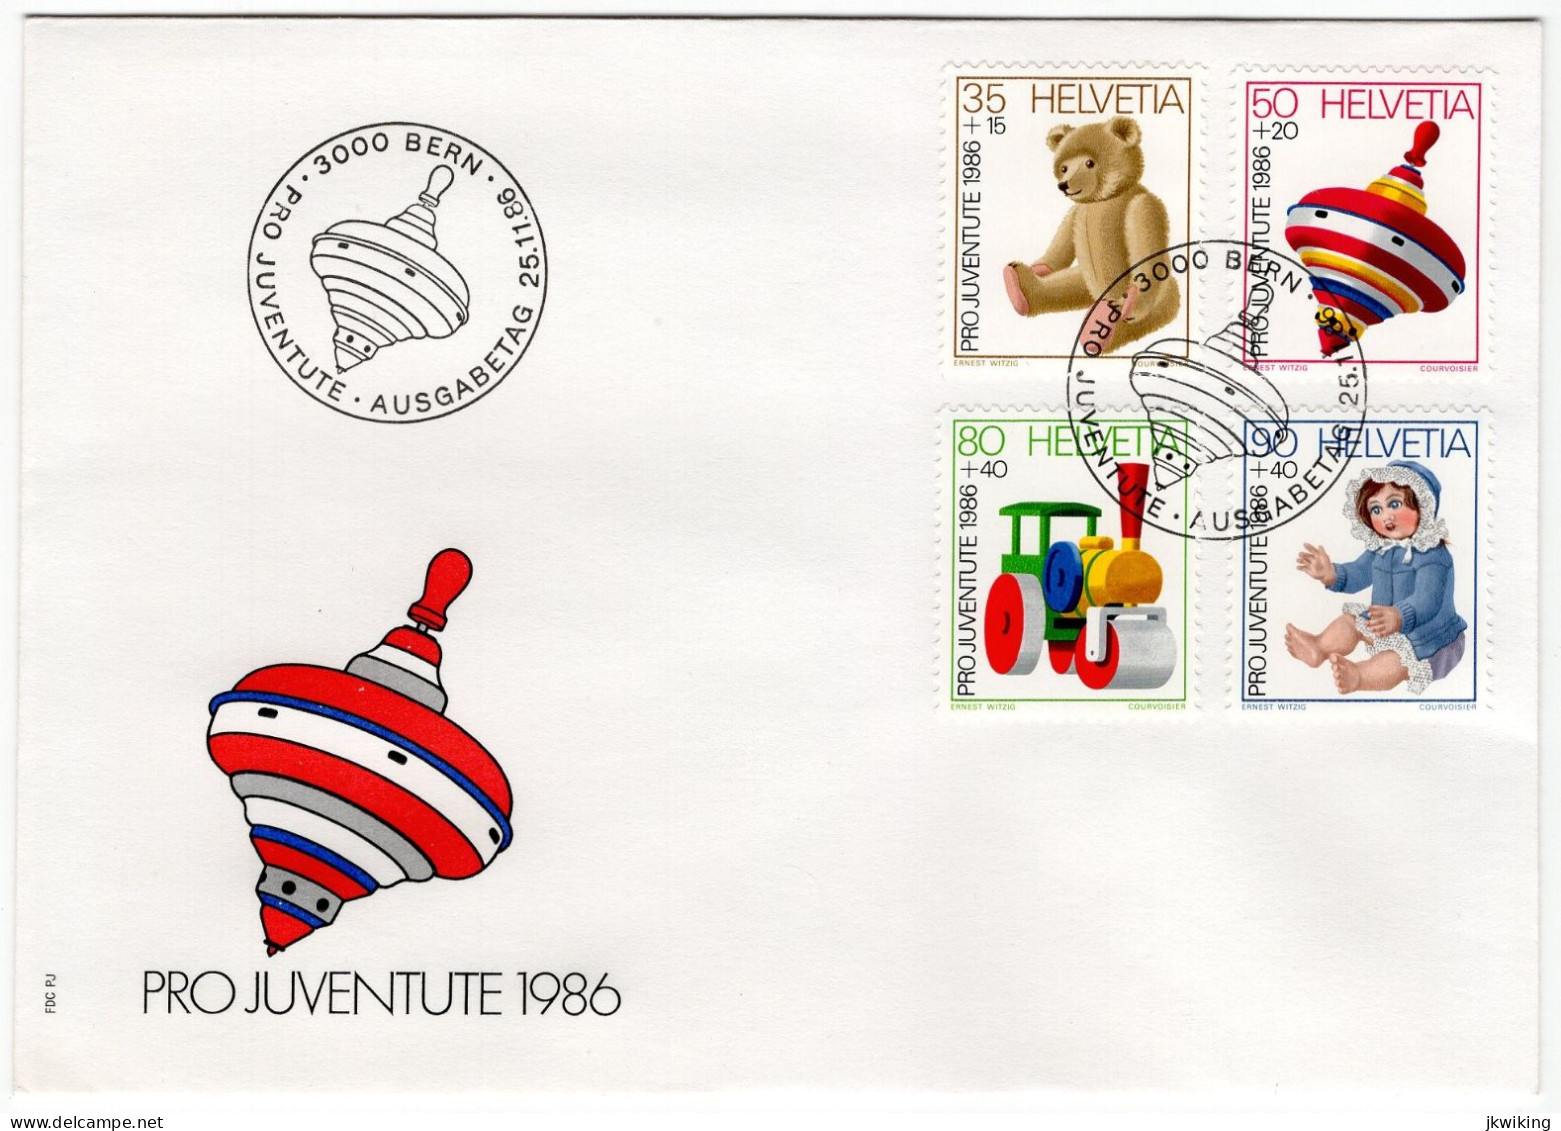 SWITZERLAND, PRO JUVENTUTE 1986, FDC, MICHEL No. 1331-1334 Doll, Teddy Bear - Children's Toys - Other & Unclassified